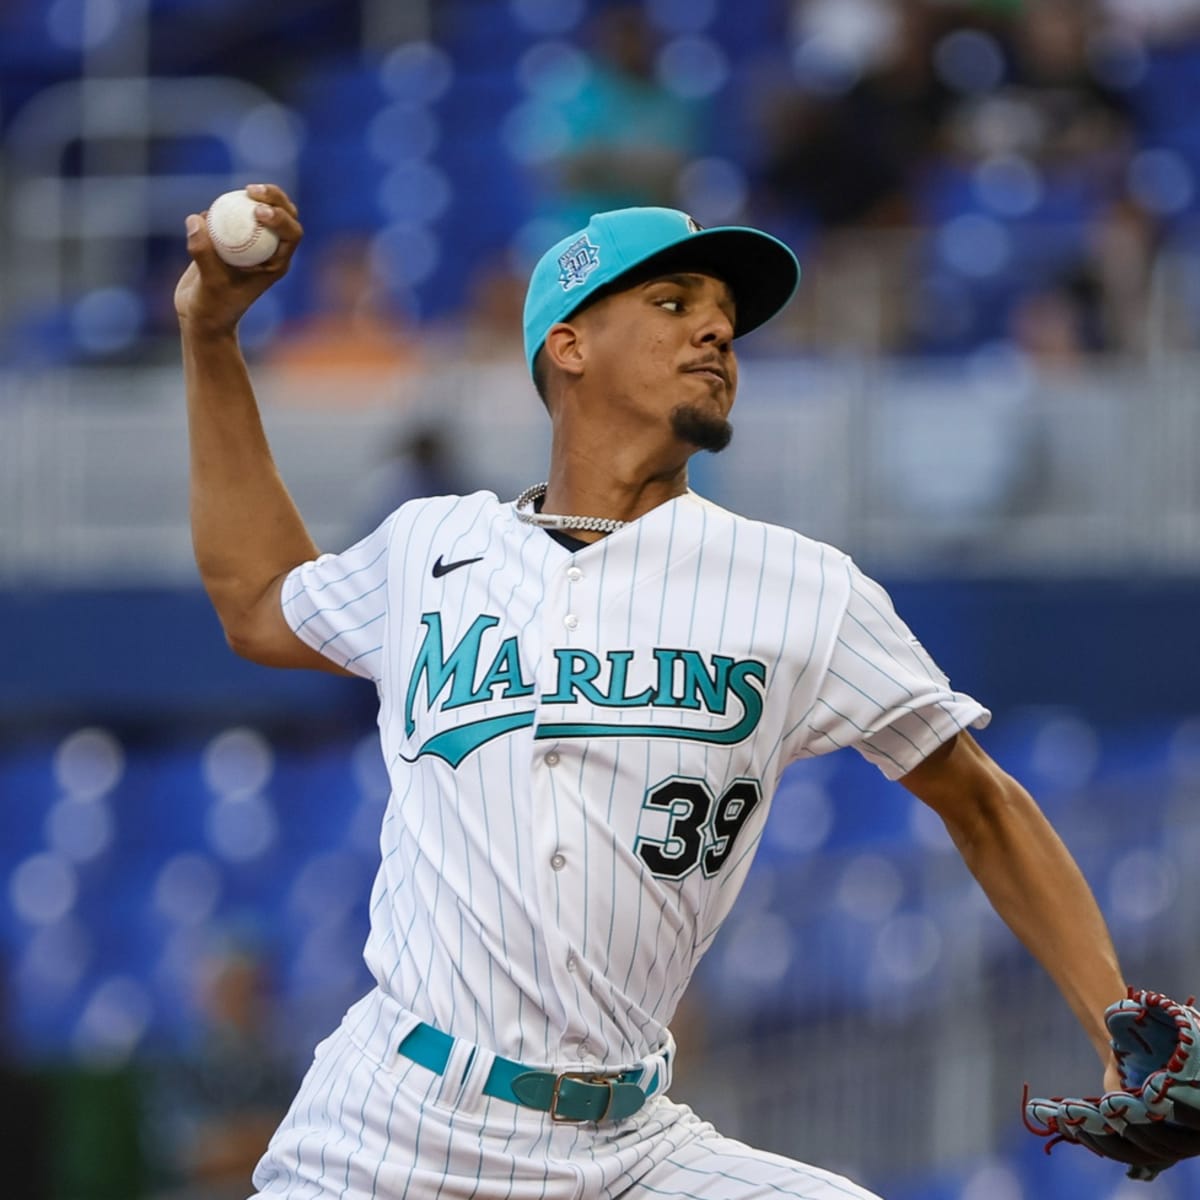 Marlins send Eury Perez back to minor leagues